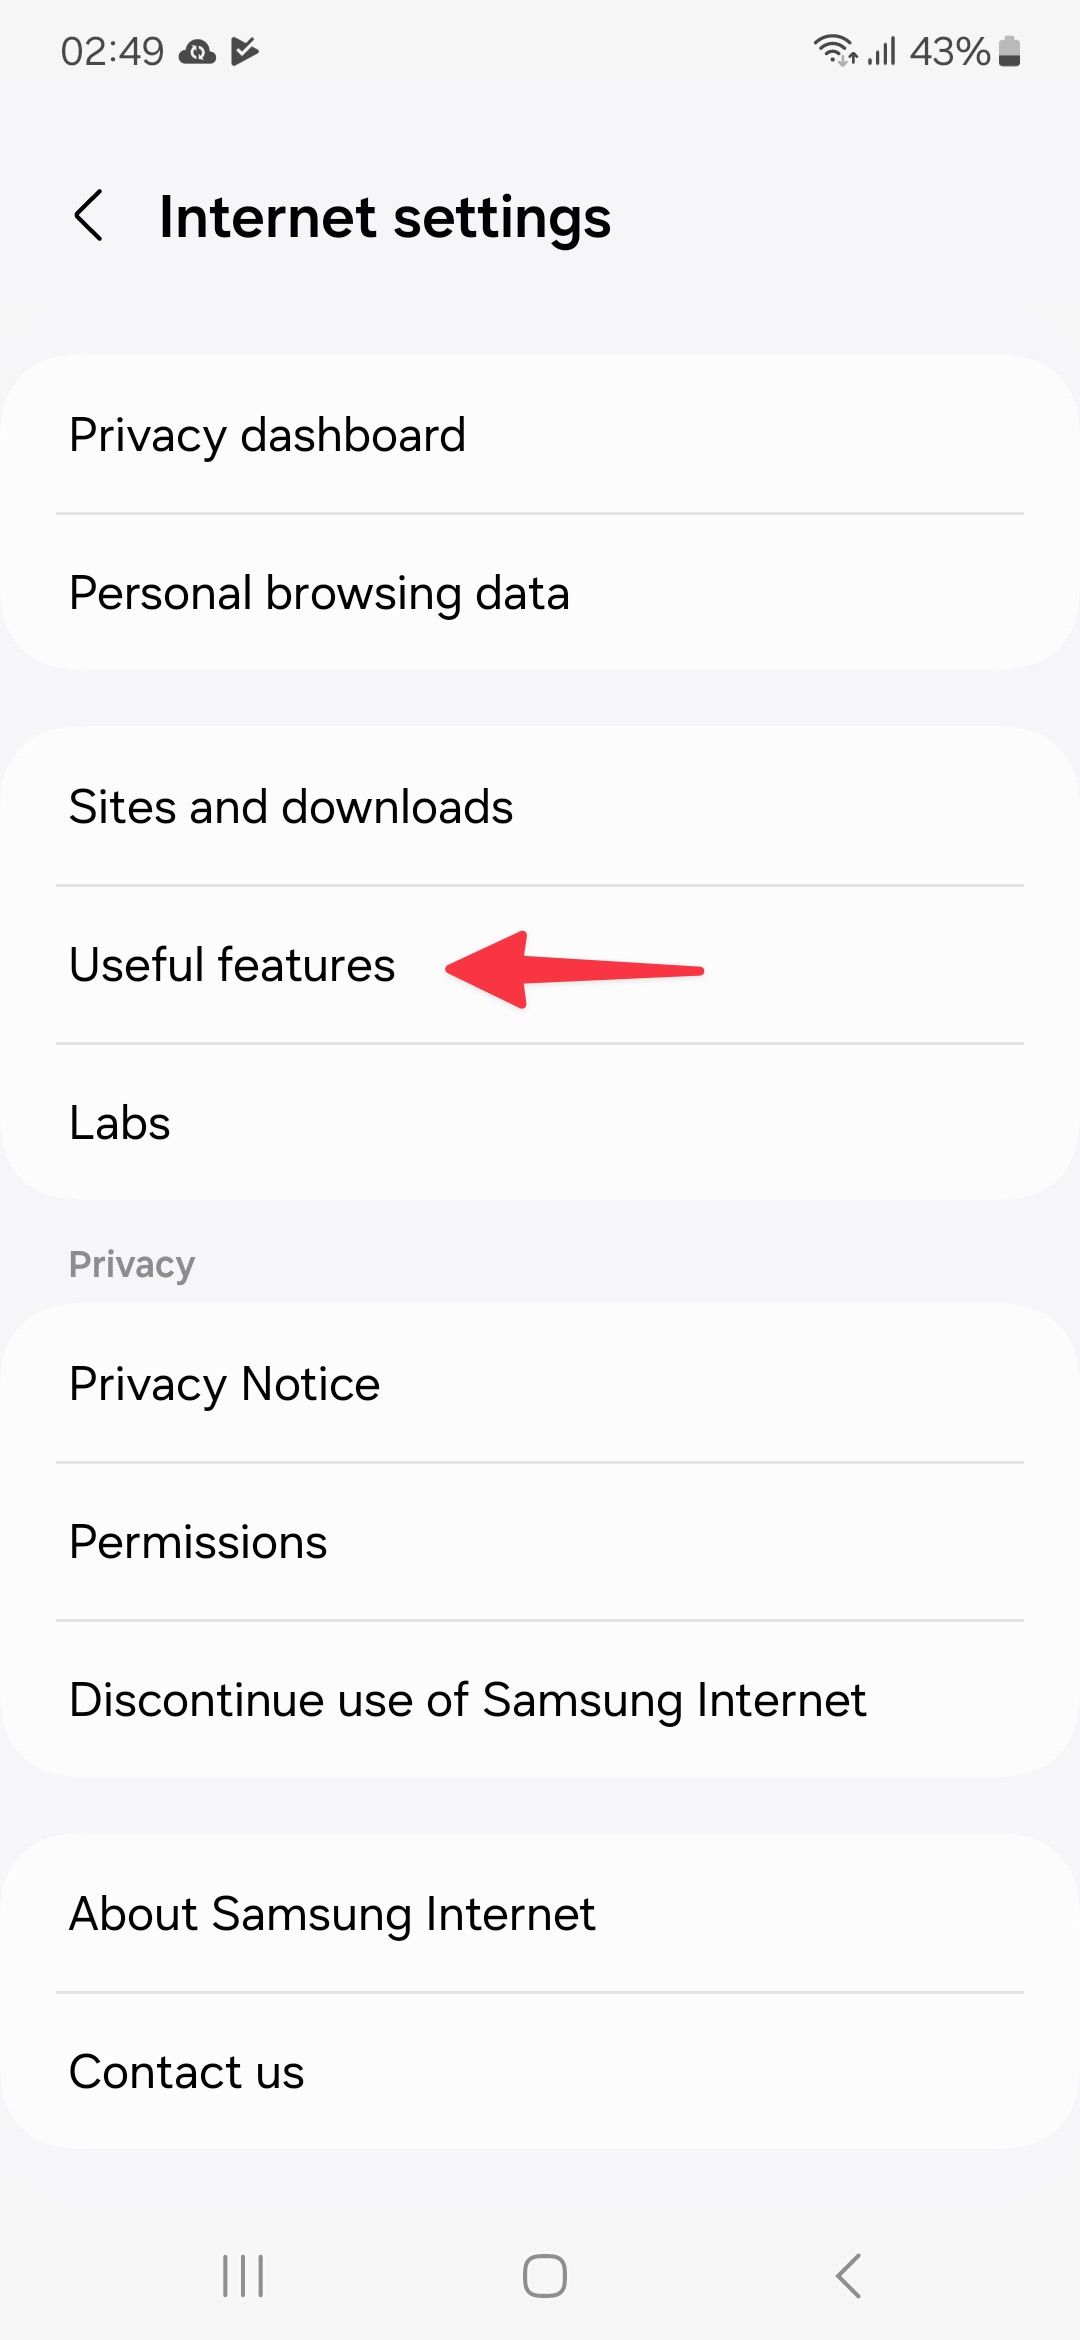 Useful features on Samsung Internet